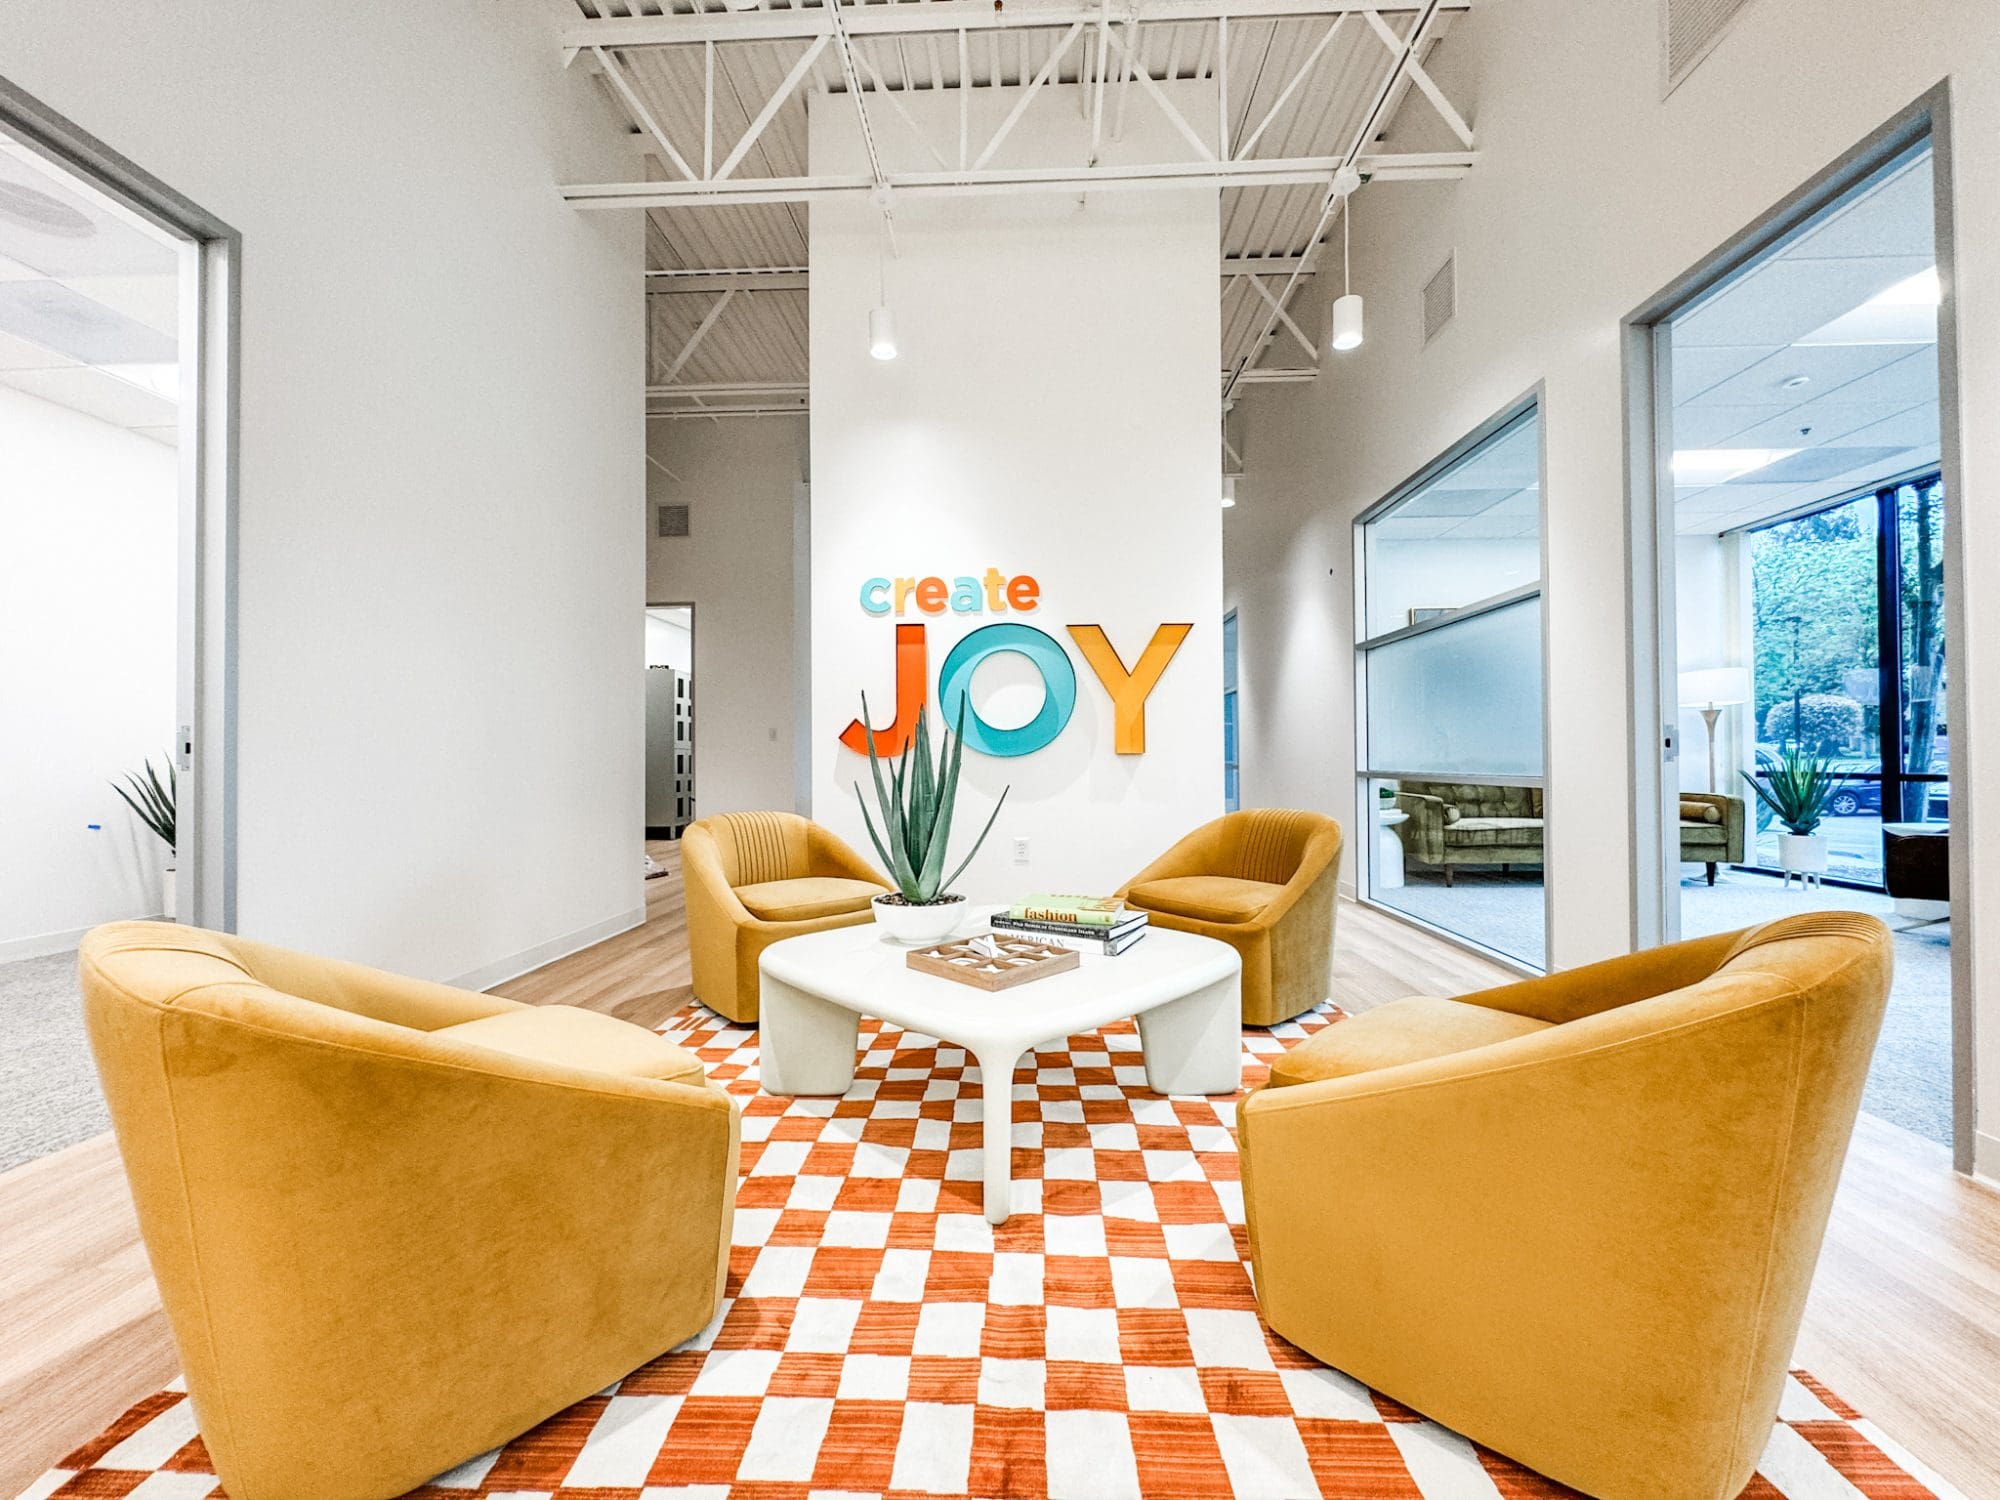 Group therapy area and create joy sign in Walnut Creek, CA outpatient program.